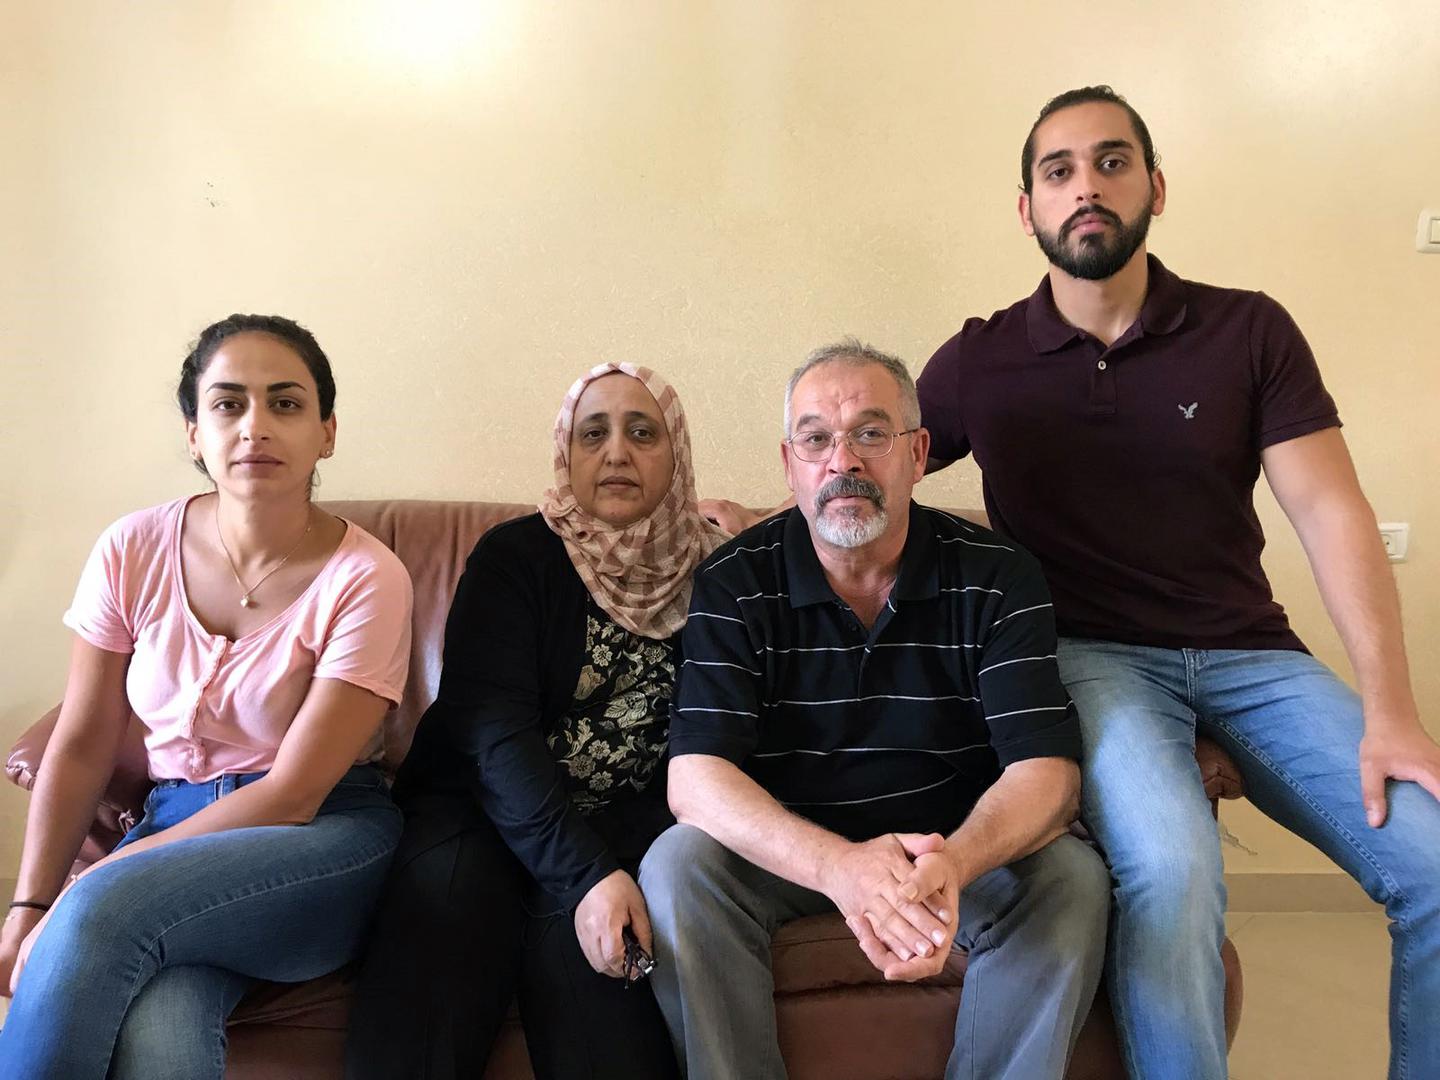 Wael Kawamleh, a Palestinian resident of East Jerusalem, with his wife, Faheema al-Saedi, and two eldest children, Fayez and Khulood. Israeli authorities rejected residency applications for Fayez and Khulood, leaving them effectively stateless and unable 